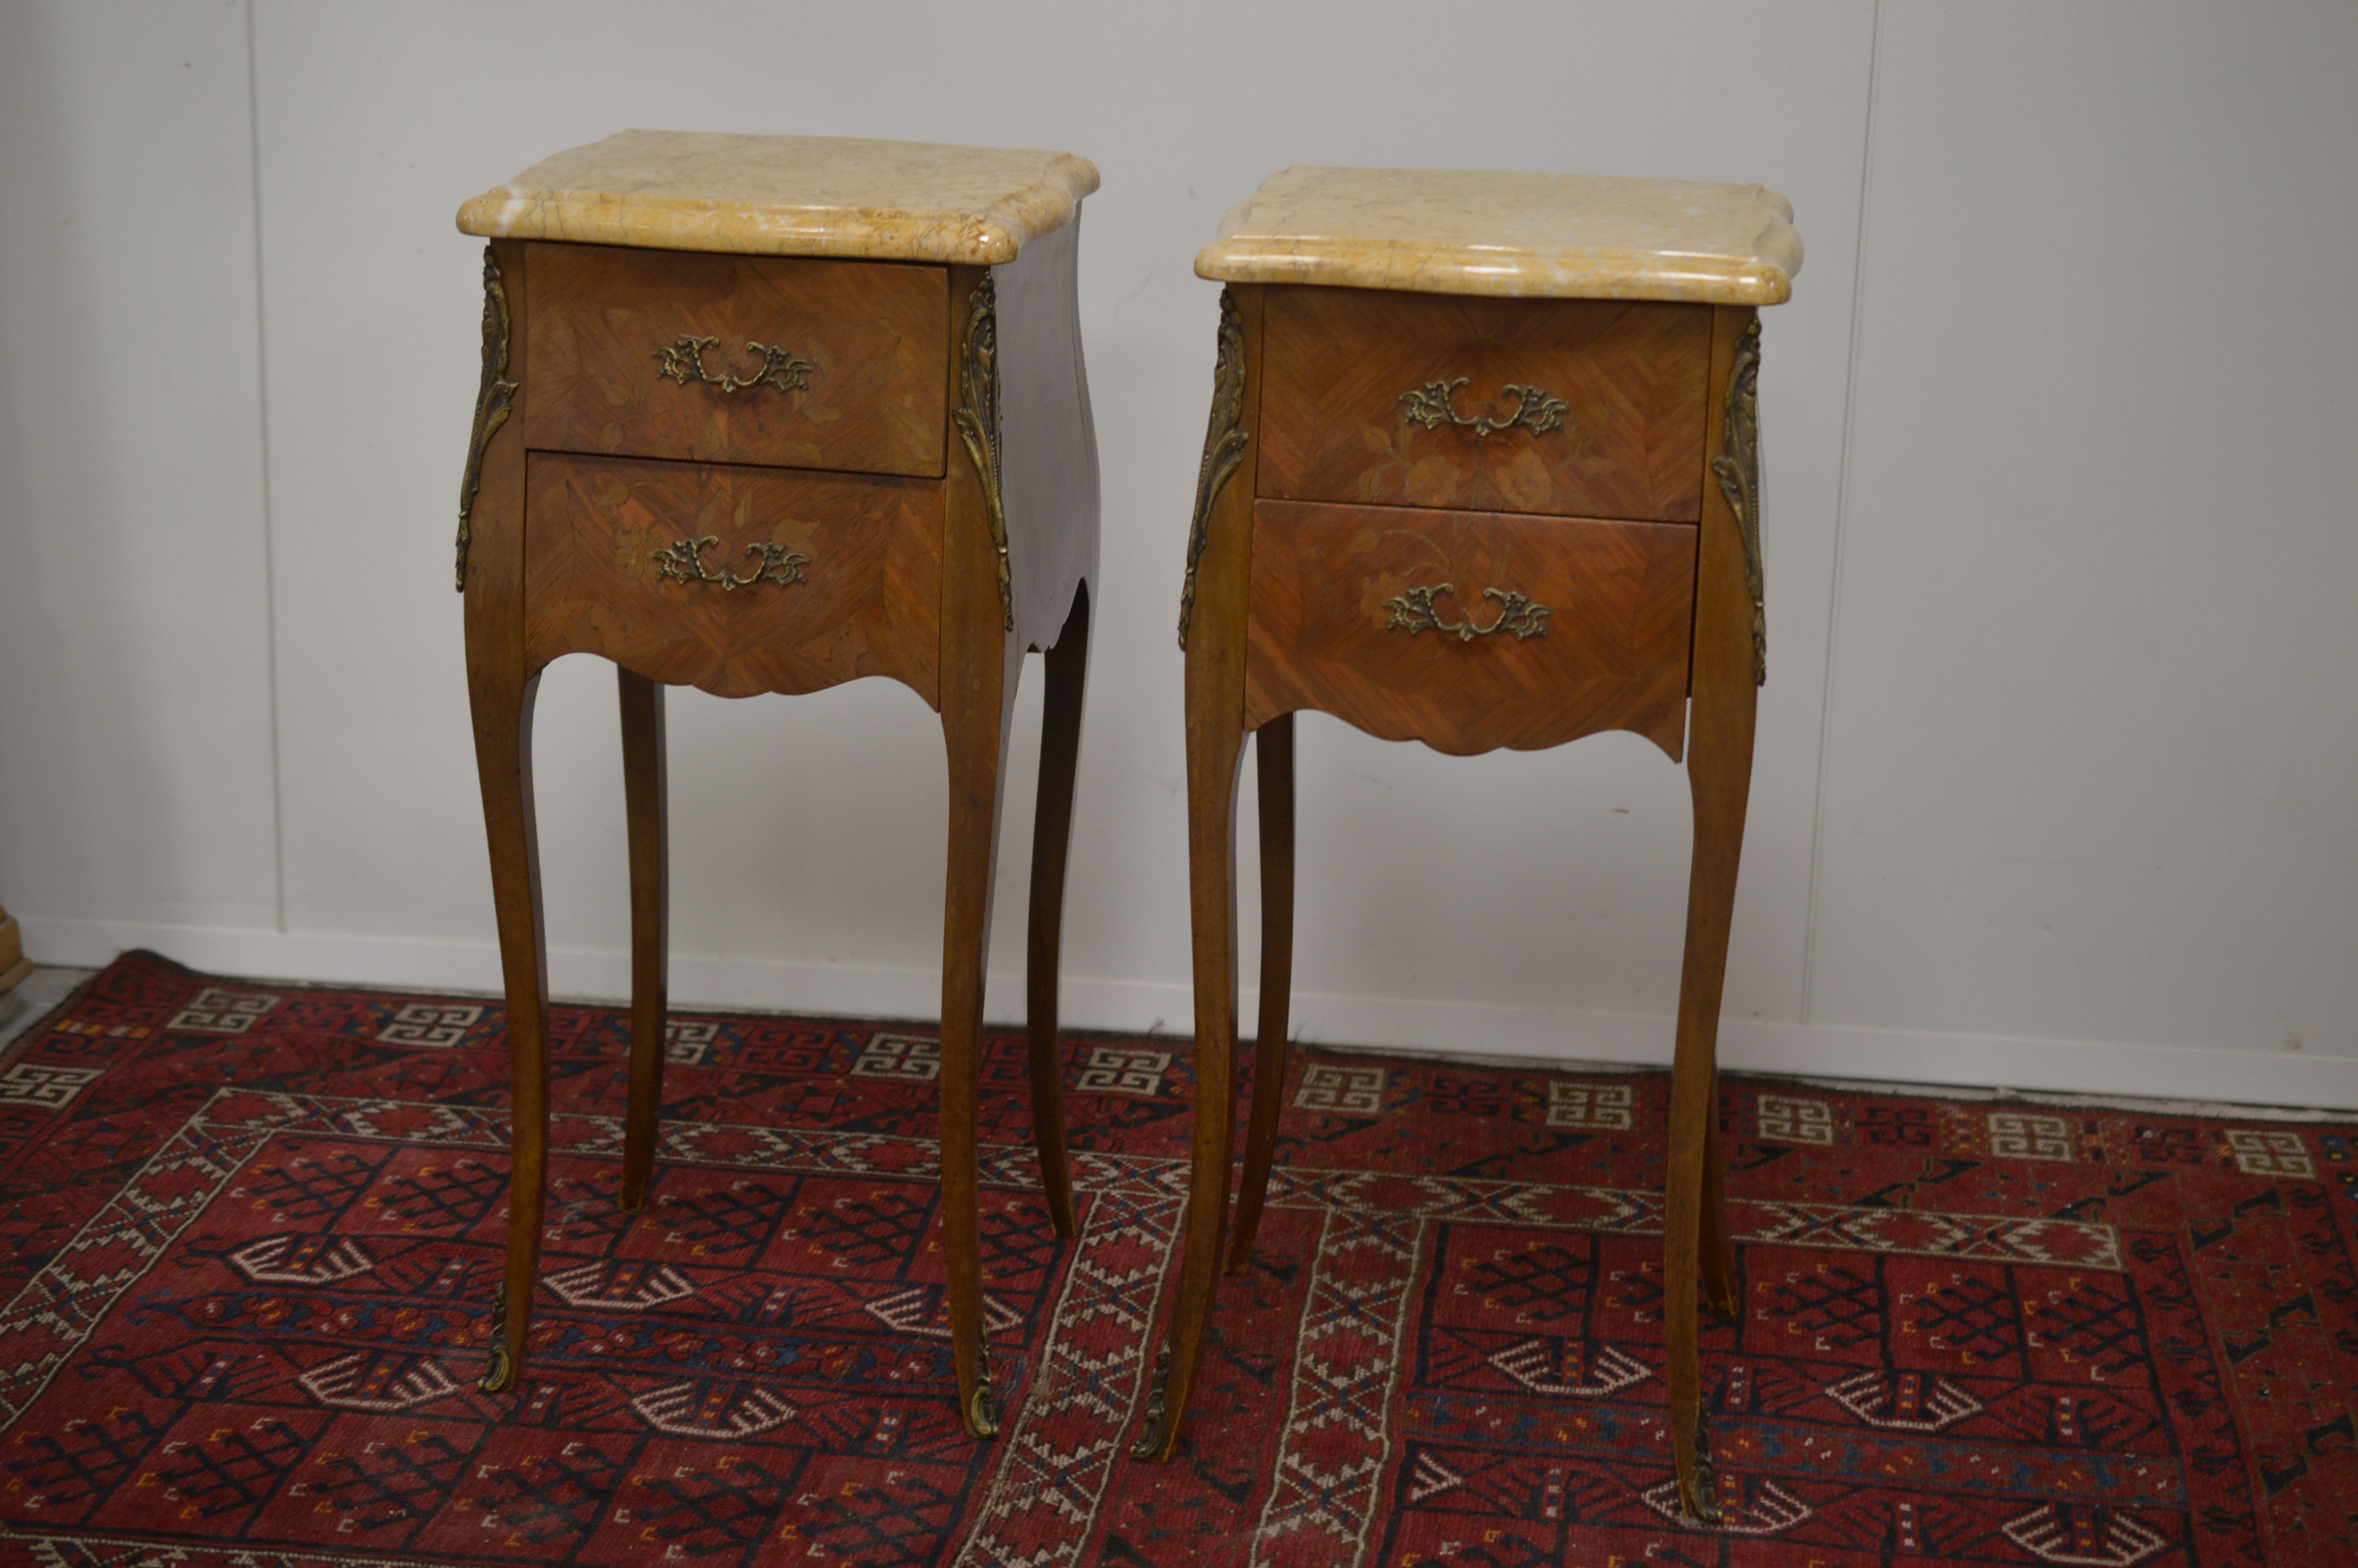 Lot 120 - A pair of 20th Century French Louis XV style kingwood nightstands or bedside drawers